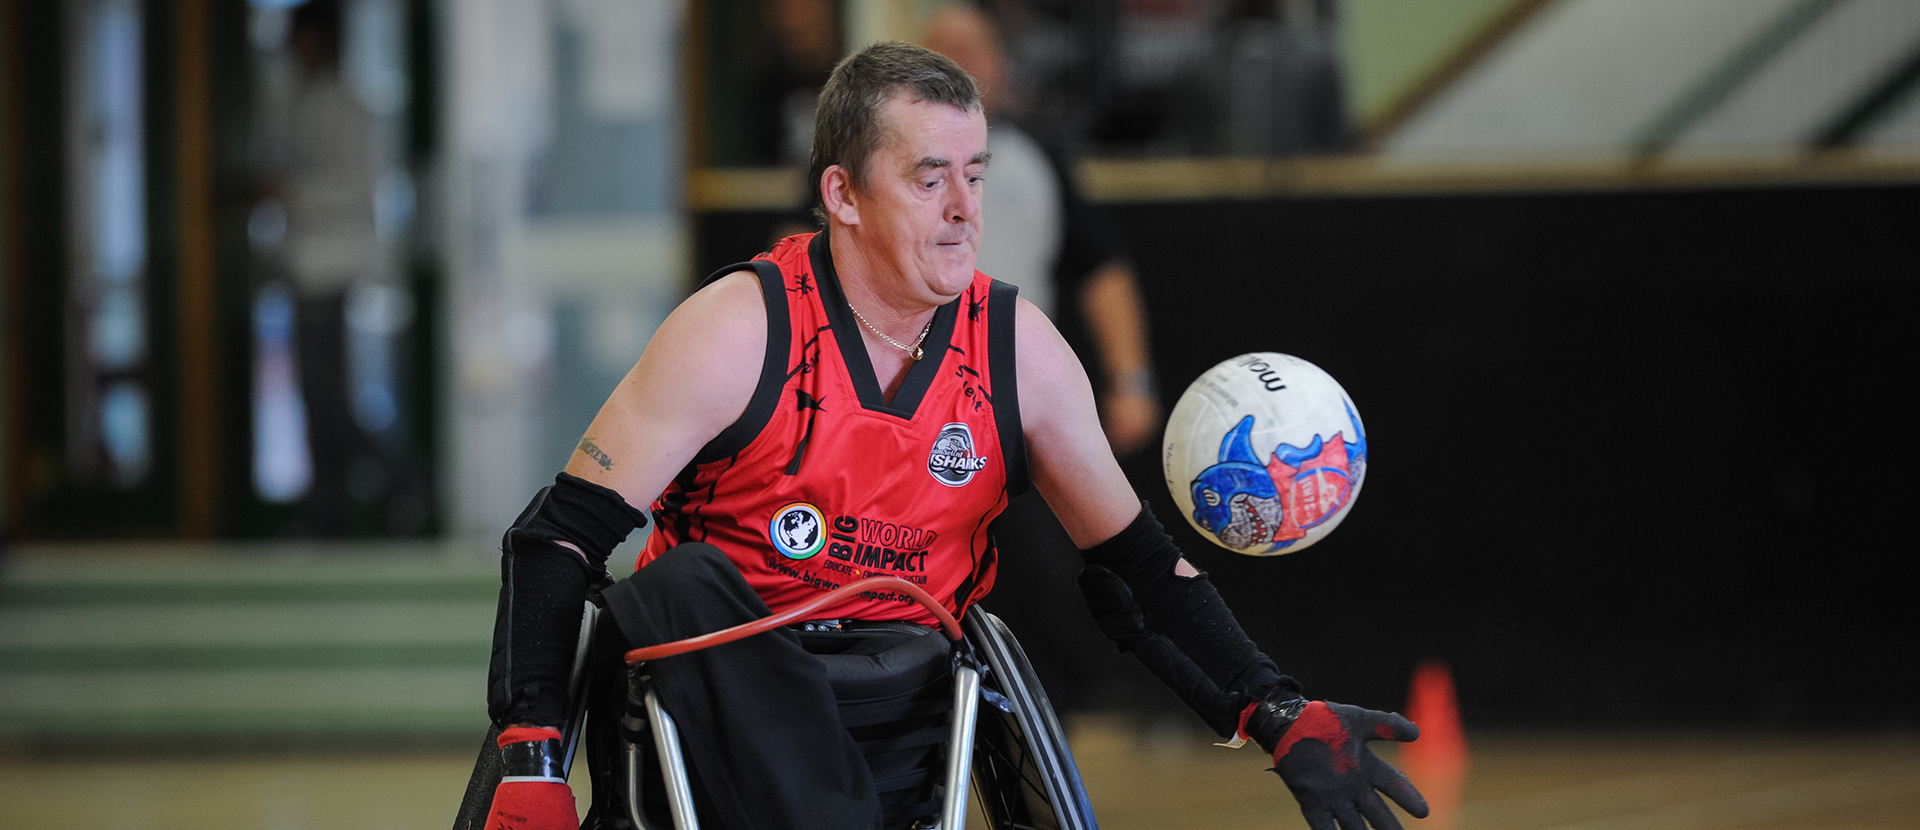 A wheelchair rugby player wearing Josh Steel's gloves during a match